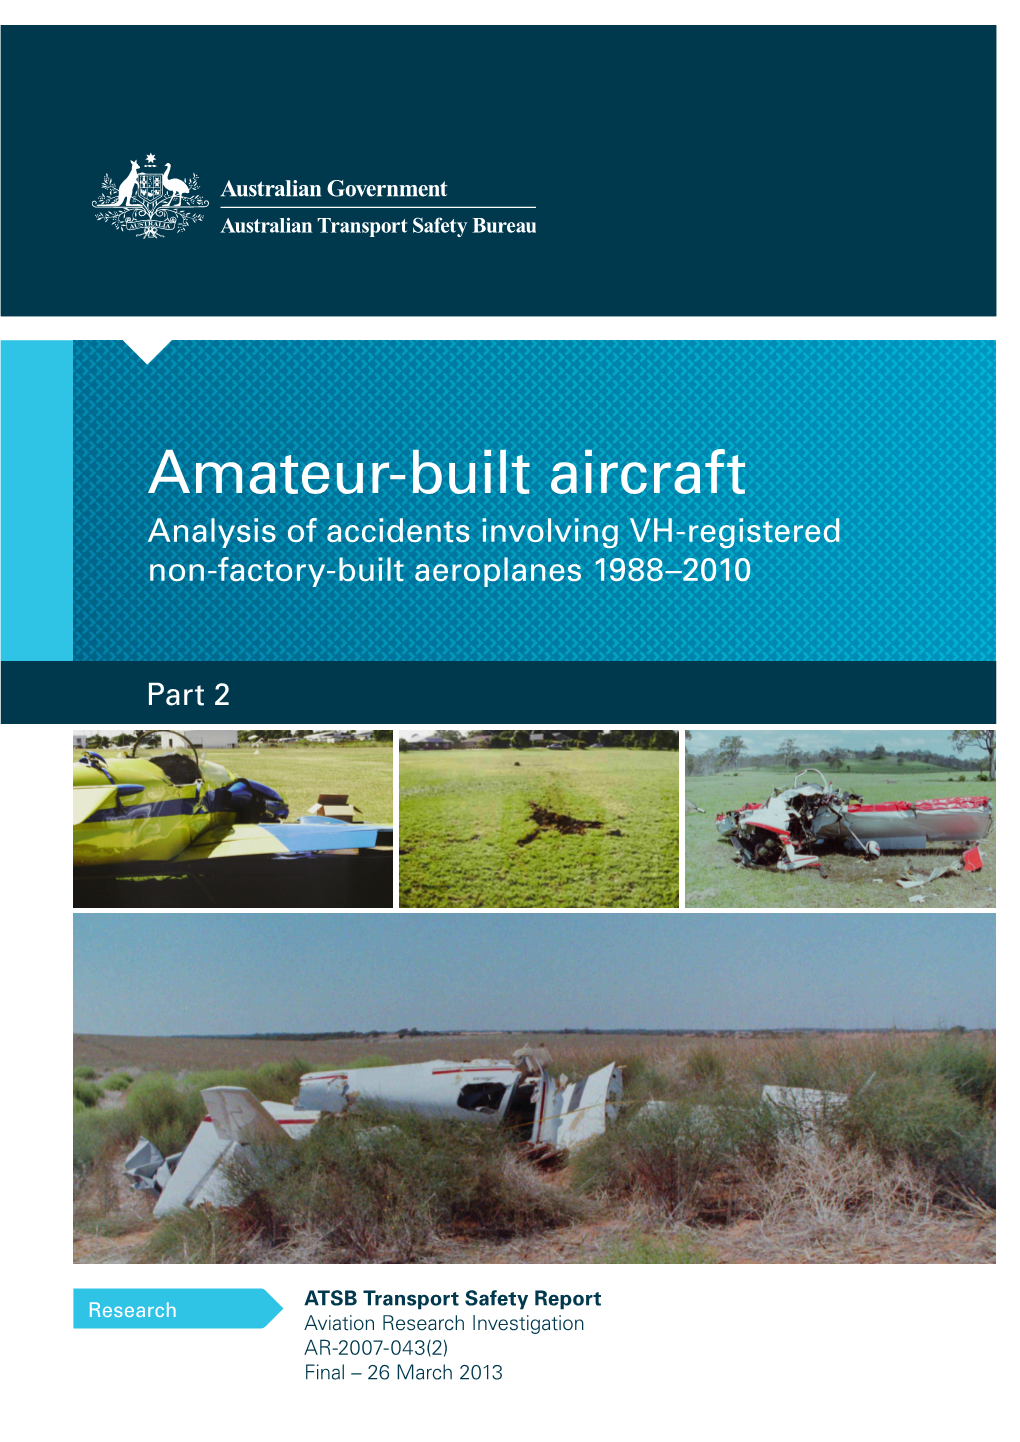 Amateur-Built Aircraft Part 2: Analysis of Accidents Involving VH-Registered Non-Factory-Built Aeroplanes 1988-2010